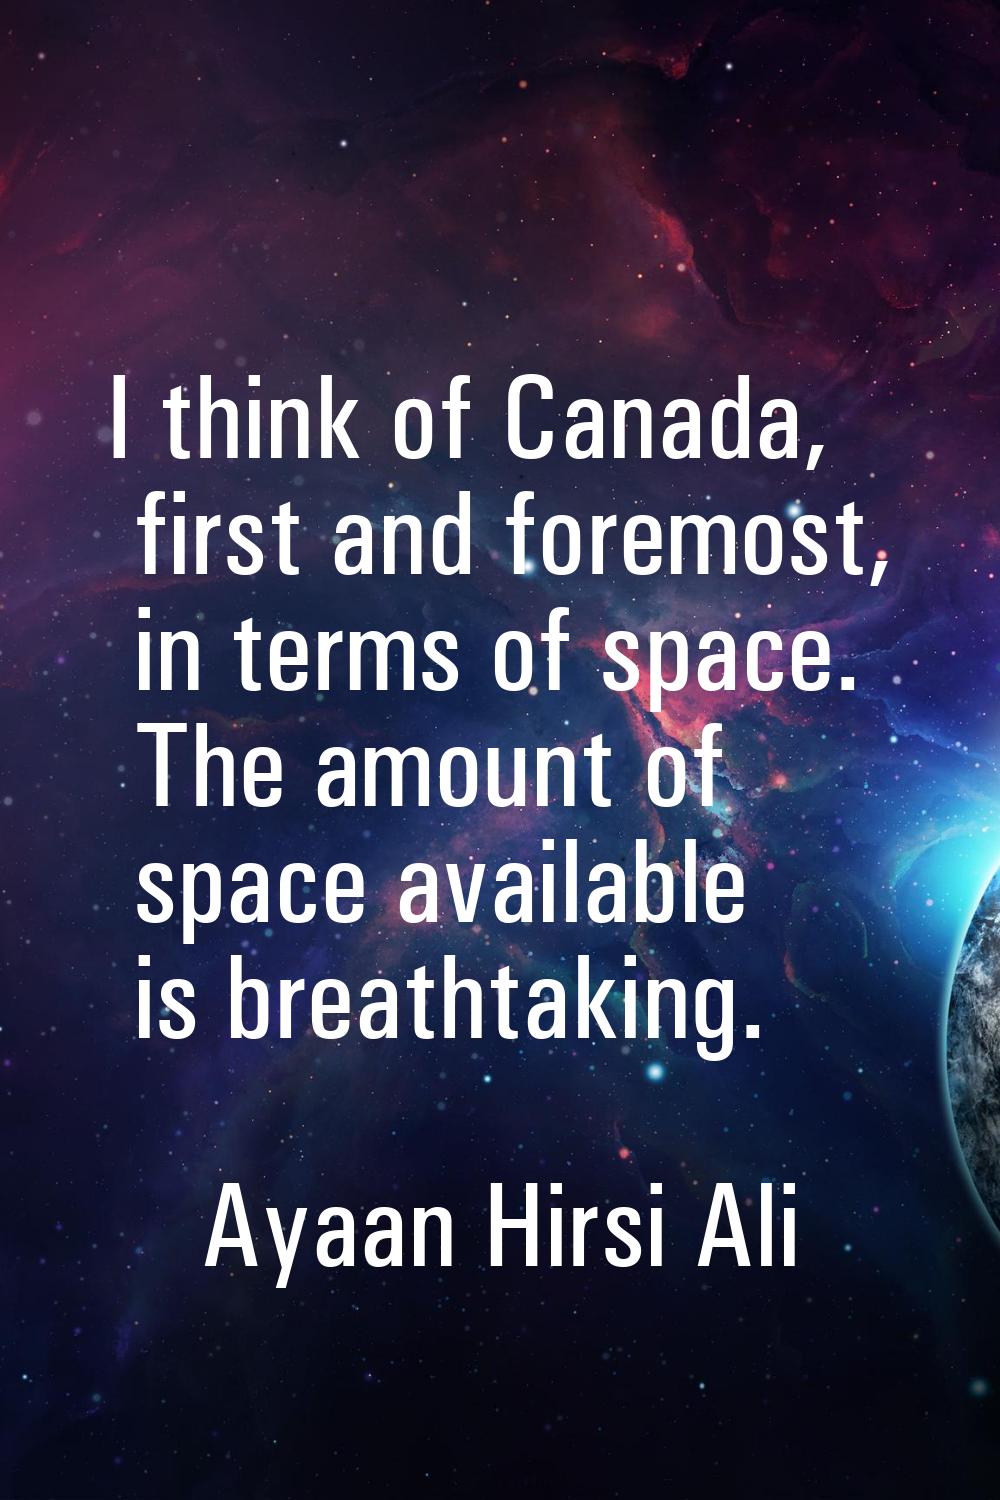 I think of Canada, first and foremost, in terms of space. The amount of space available is breathta